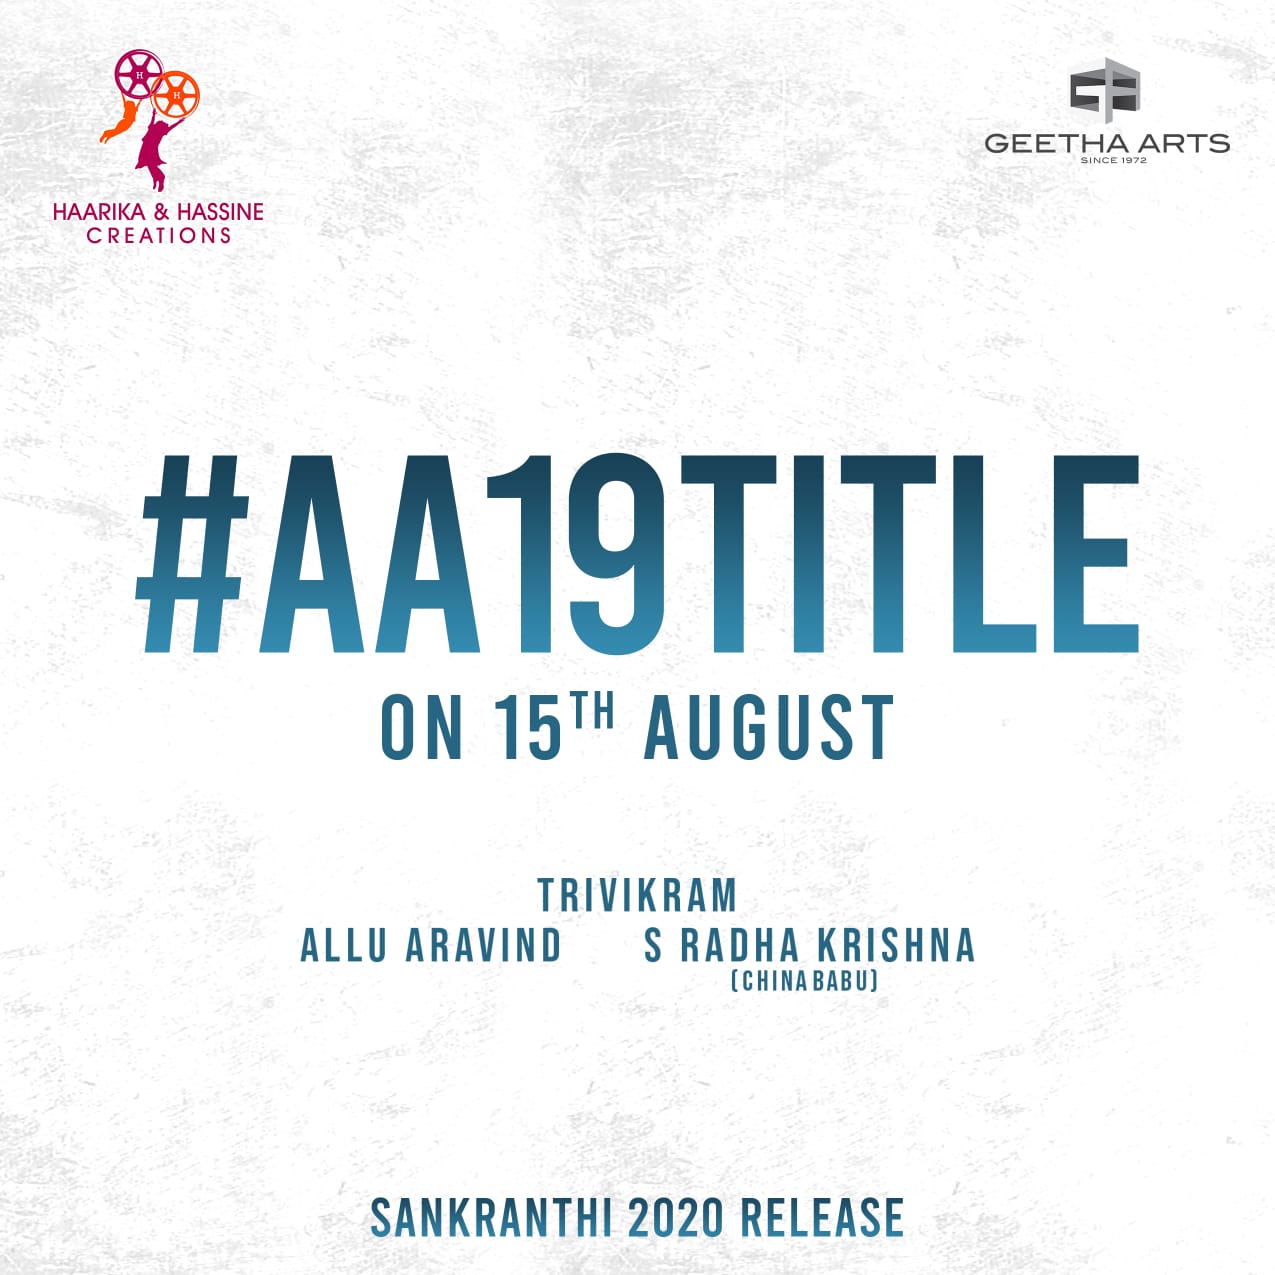 AA19Title will be unveiled on 15th August